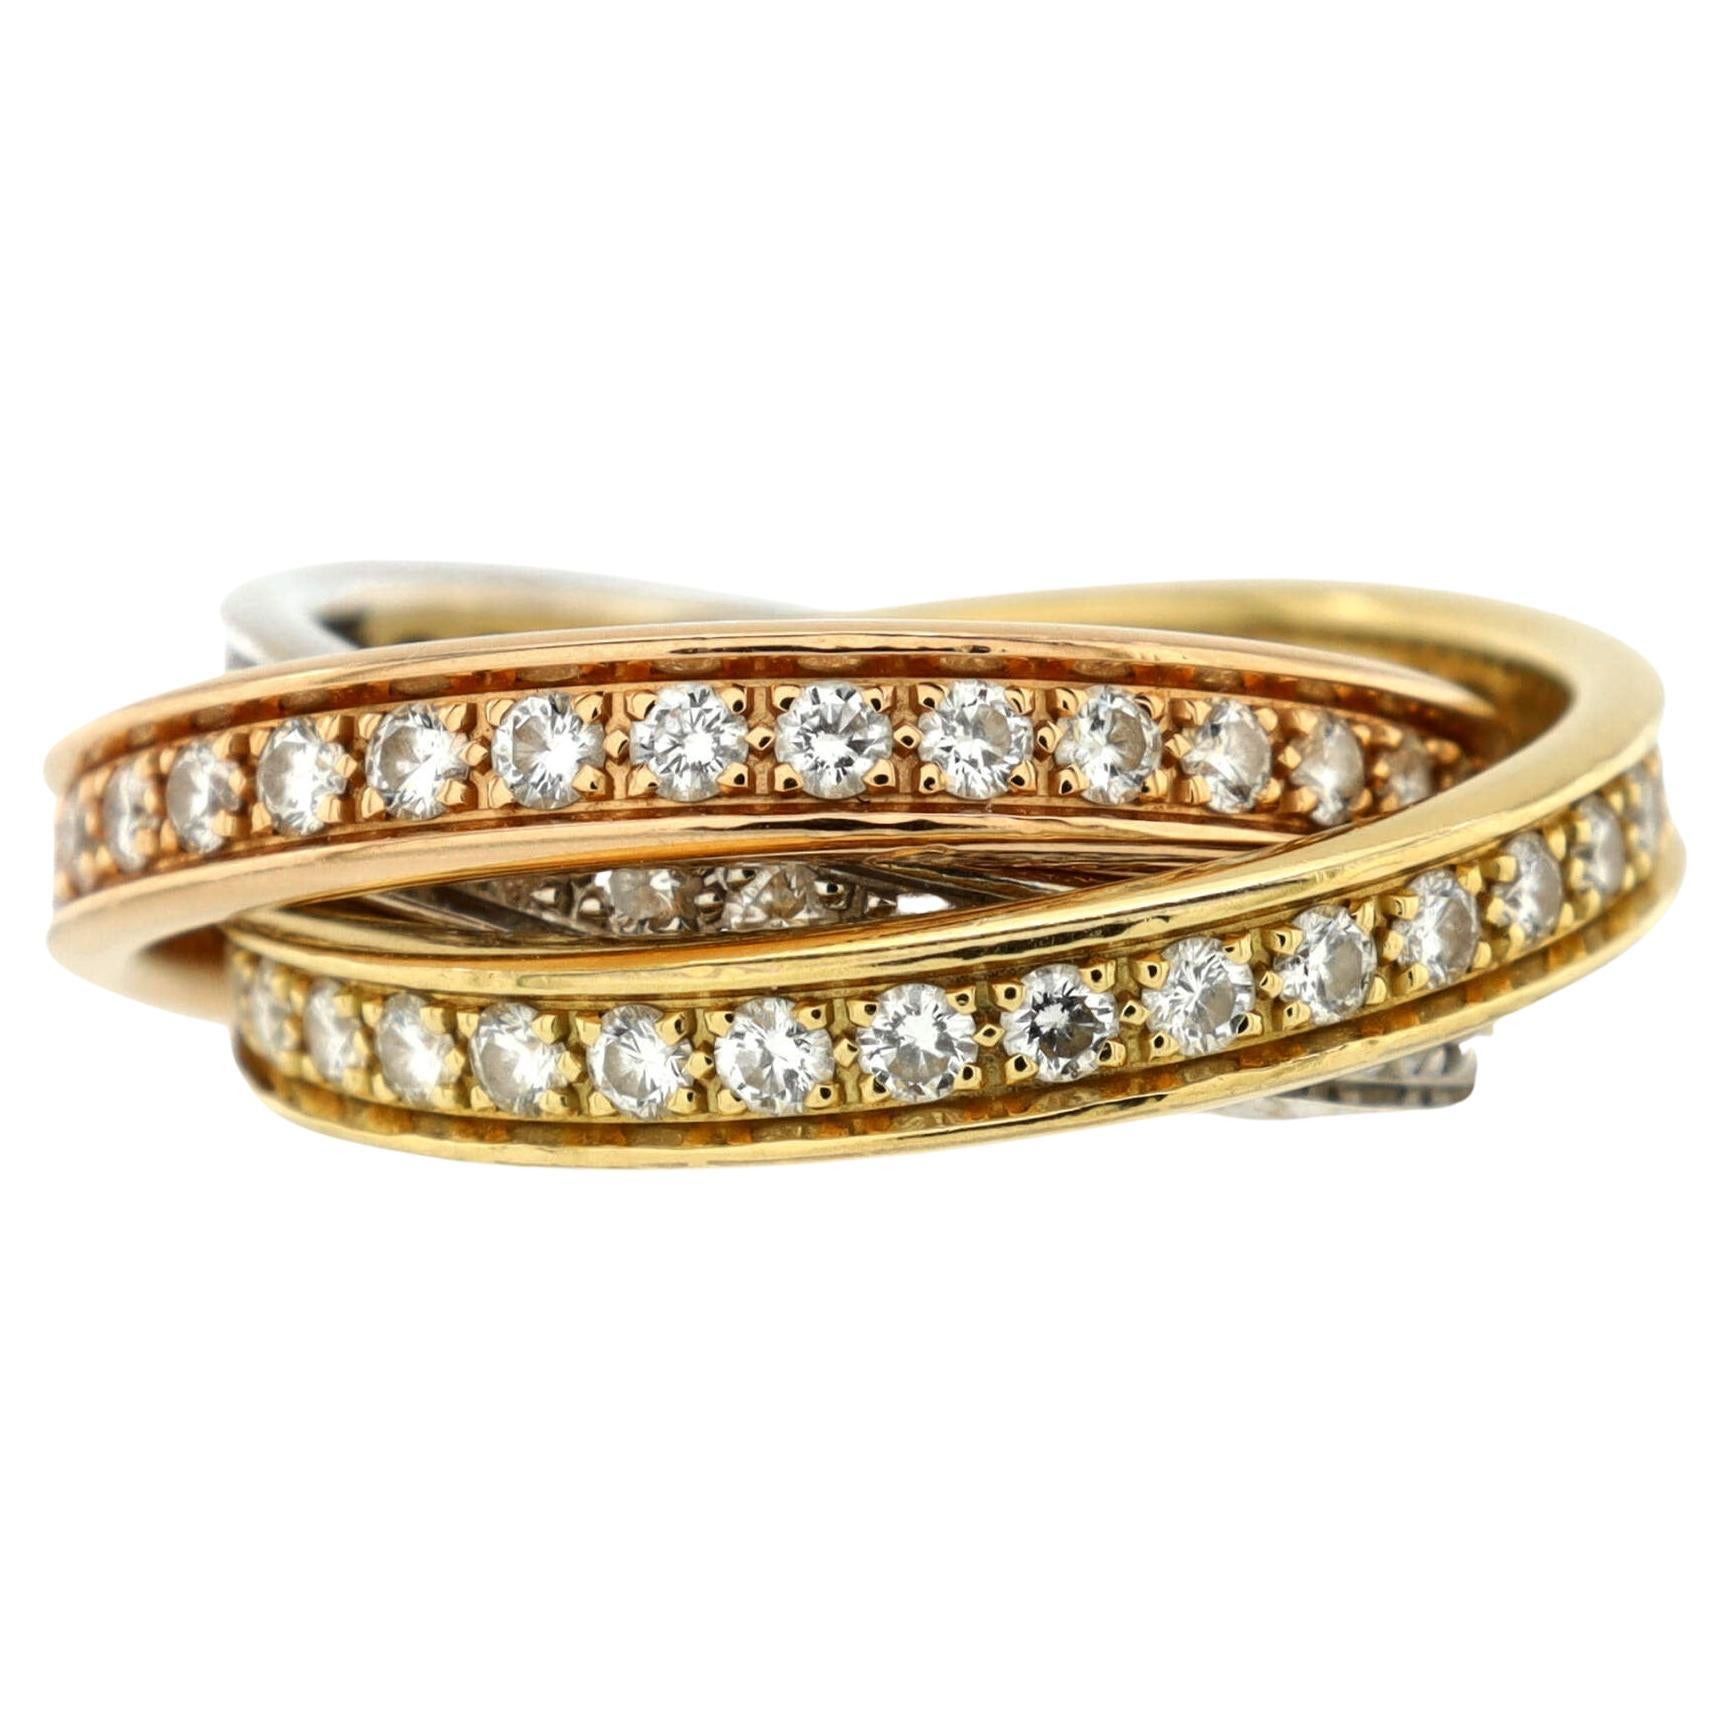 Cartier Trinity Ring 18K Tricolor Gold with Diamonds